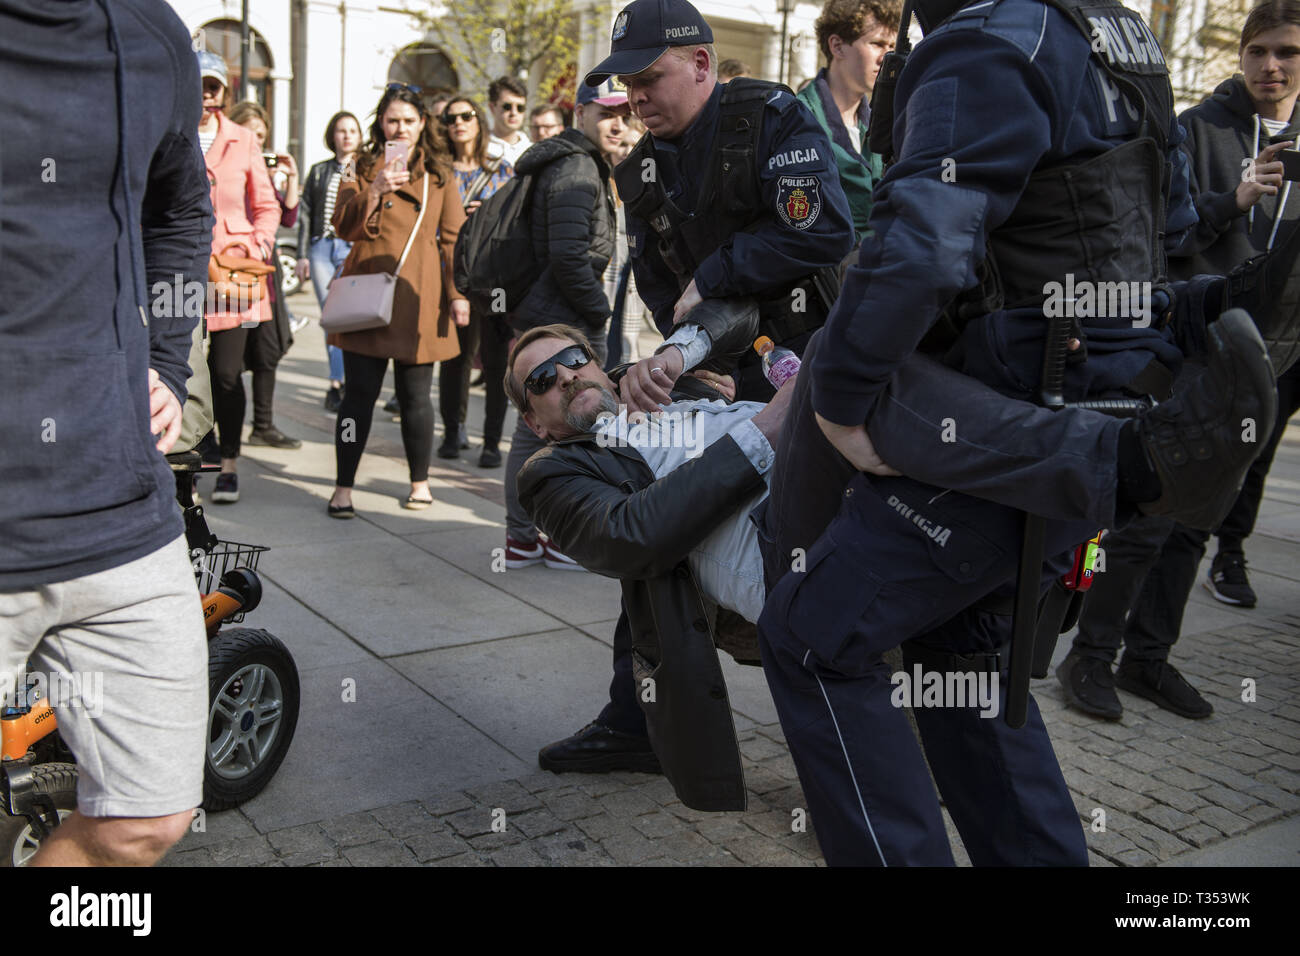 Warsaw, Mazowieckie, Poland. 6th Apr, 2019. An activist seen being taken away from the street by the police with force during the protest.''Universities free from Marxism'' a protest against the Warsaw University to express their opposition to the activity of leftist extremists and other cases of left-wing indoctrination of Polish students. In the same place, students, leftist and anti-fascist activists gathered under the slogan ''Here we learn, do not heil''. Both groups were separated by a large police cordon. Credit: Attila Husejnow/SOPA Images/ZUMA Wire/Alamy Live News Stock Photo